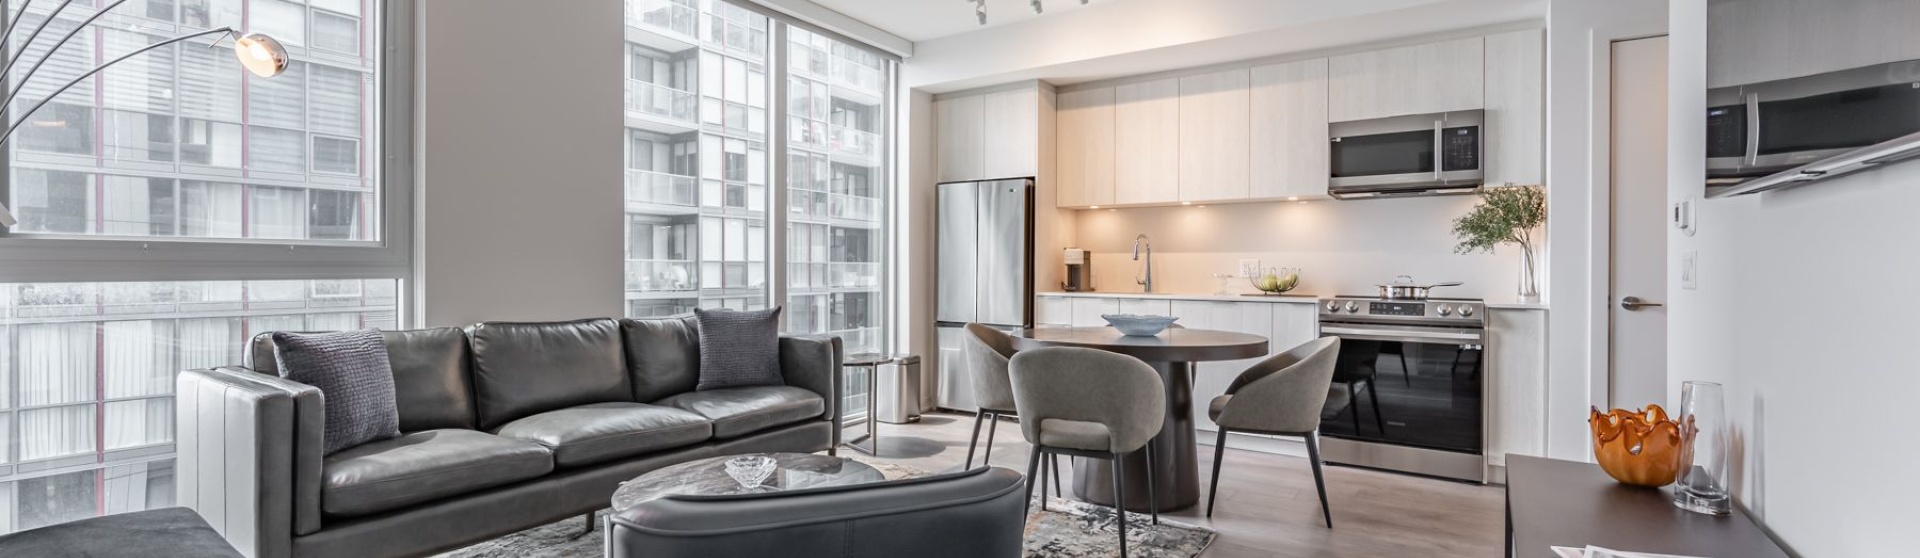 357 King St W, Toronto, Ontario, Canada M5V 0S7, 2 Bedrooms Bedrooms, ,2 BathroomsBathrooms,Condo,Purchased,357 King St W Condos,King St W,27,1458